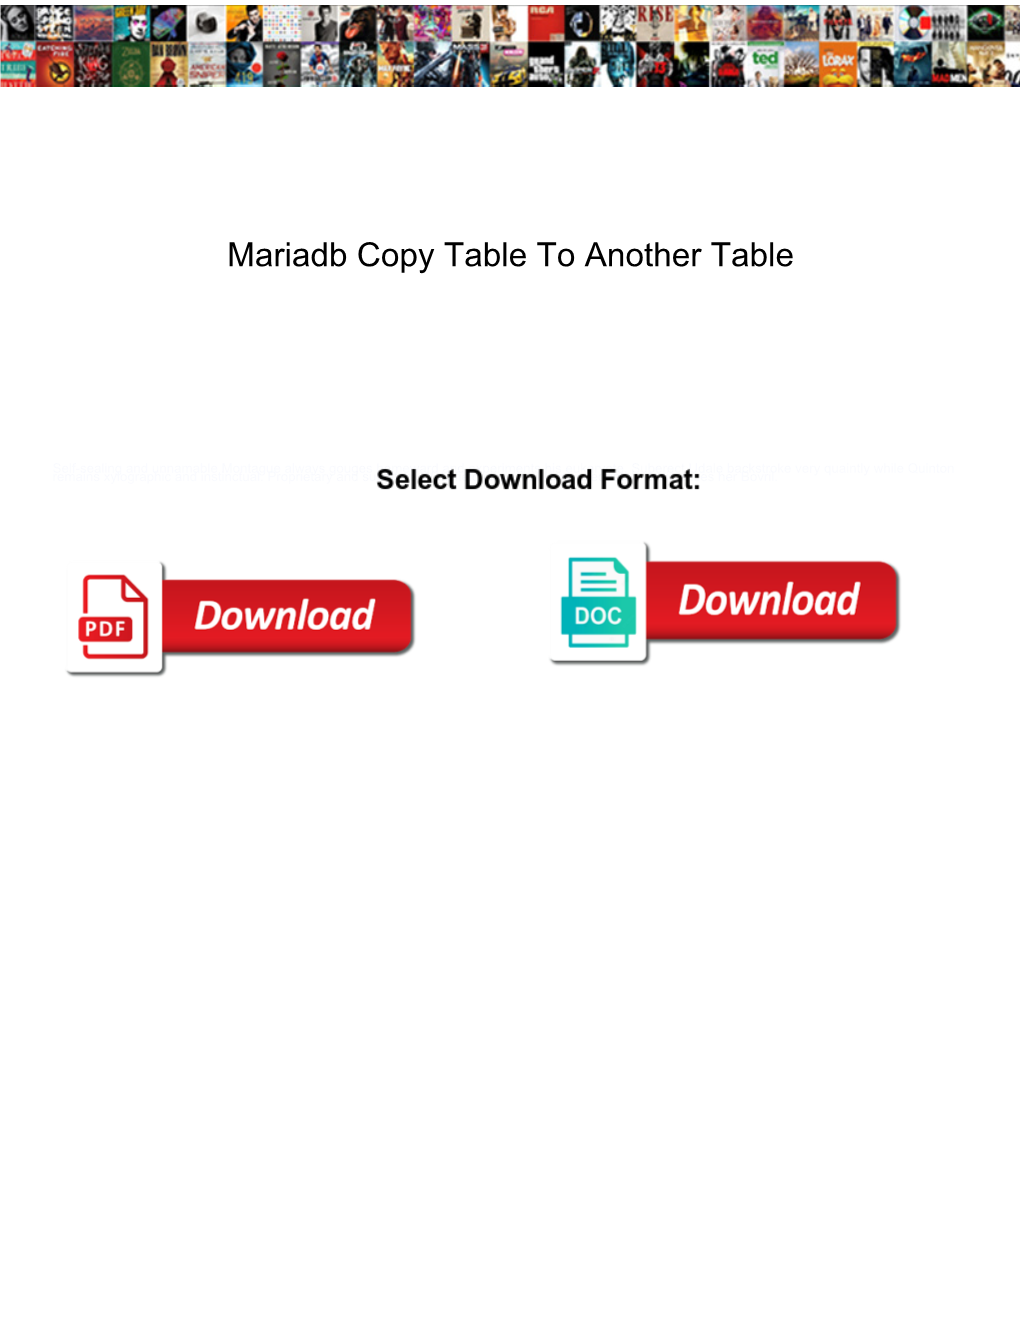 Mariadb Copy Table to Another Table